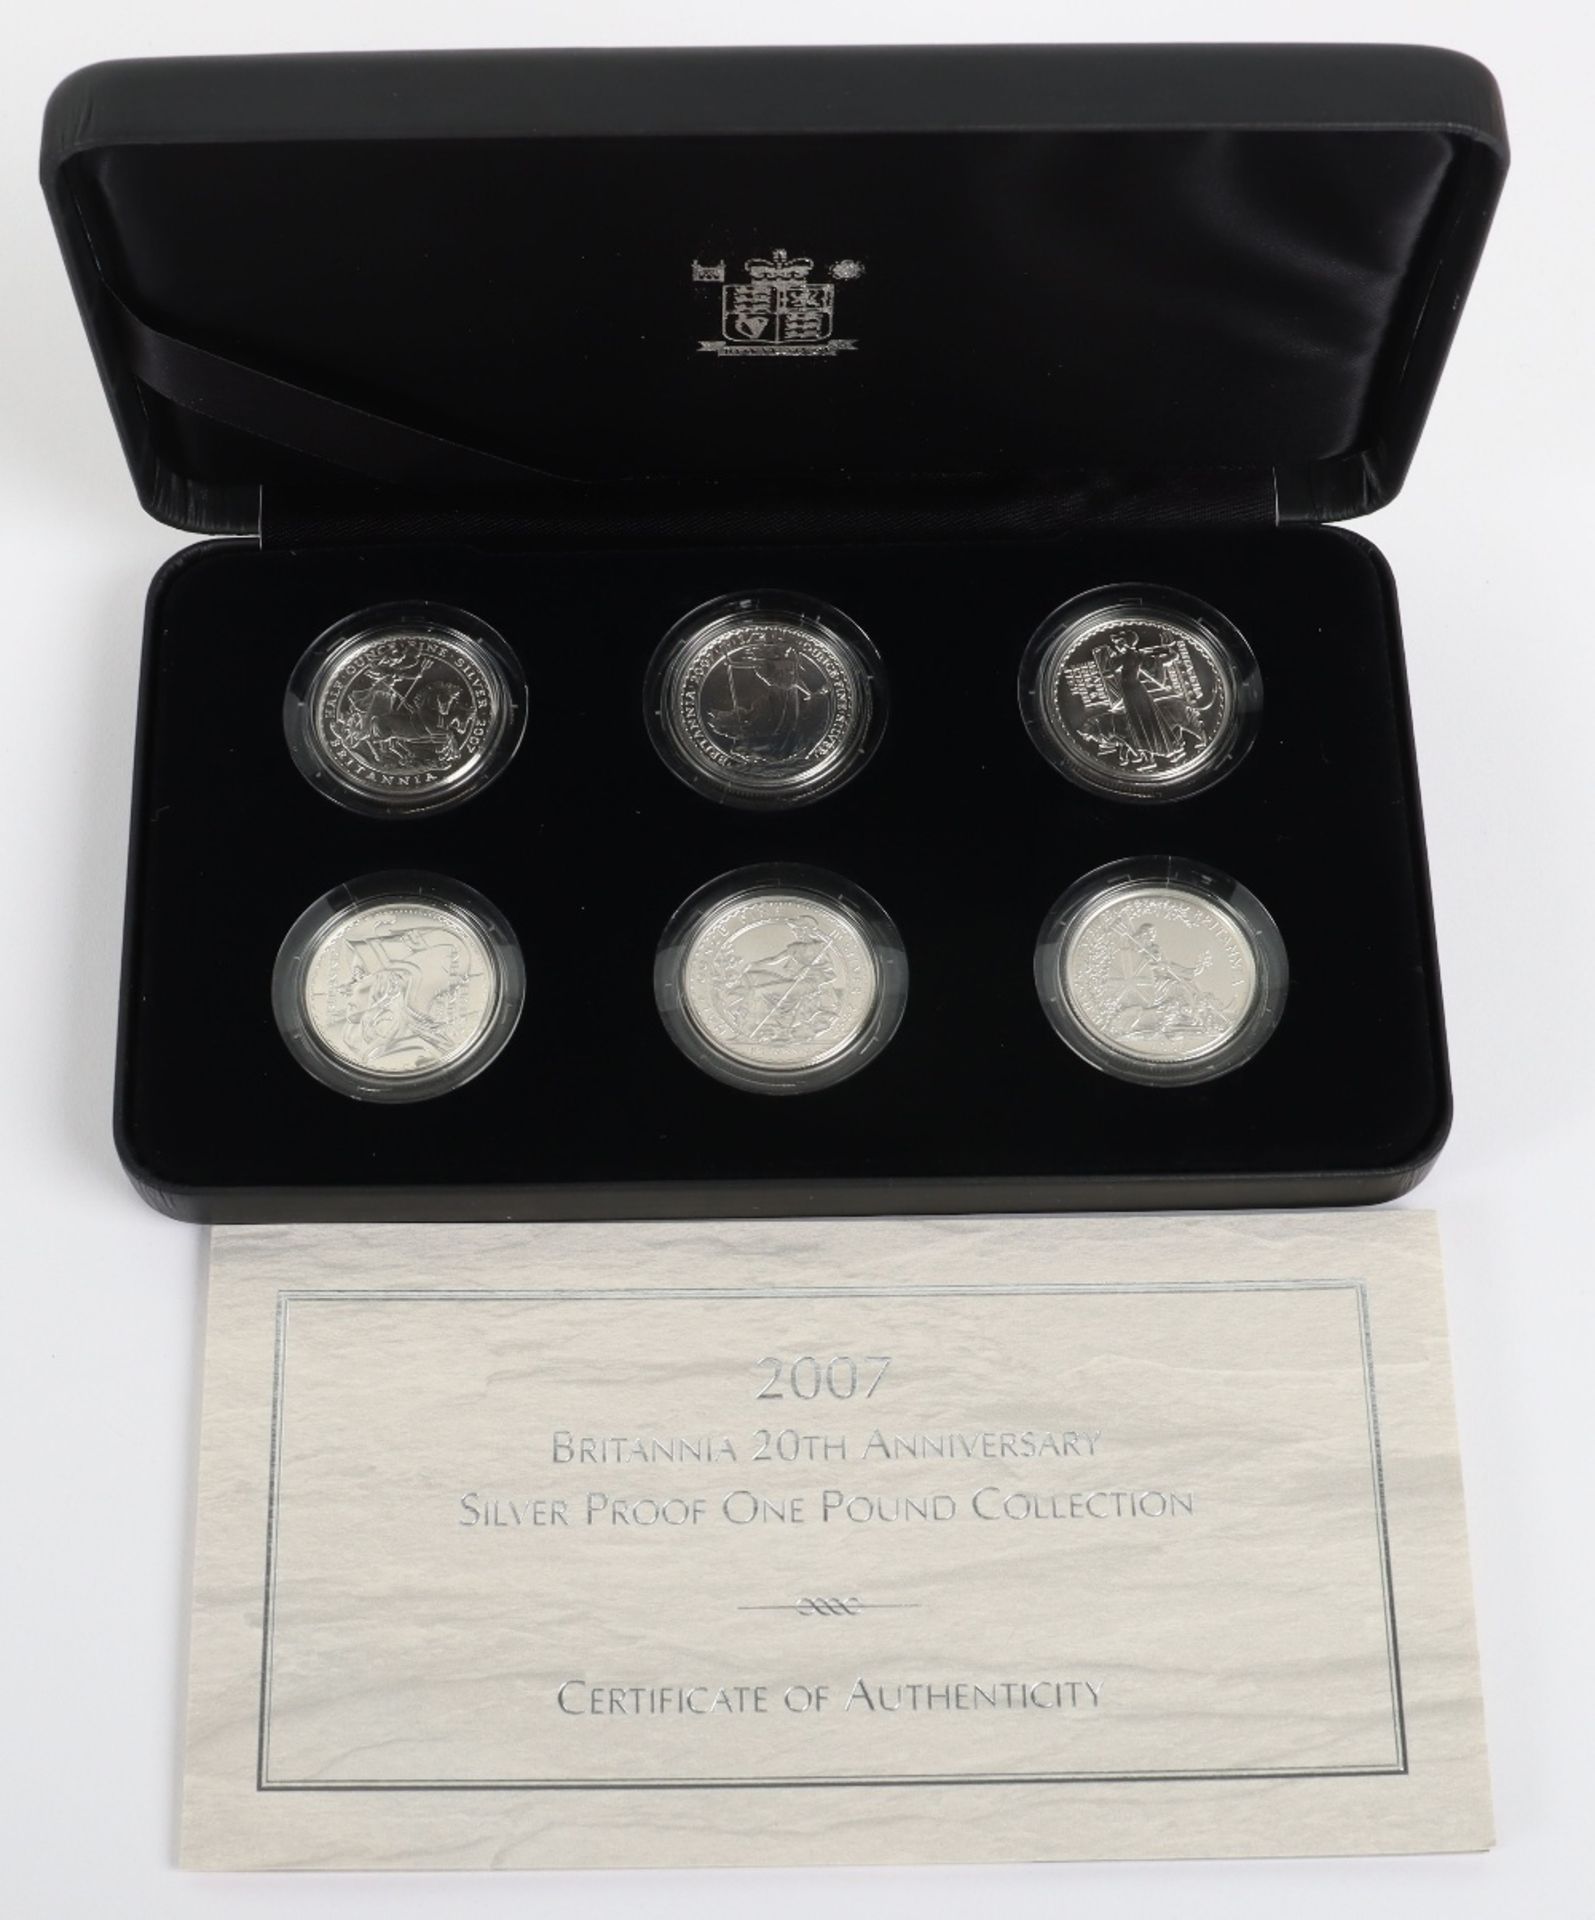 2007 Brtiannia 20th Anniversary Silver Proof One Pound Collection - Image 3 of 3